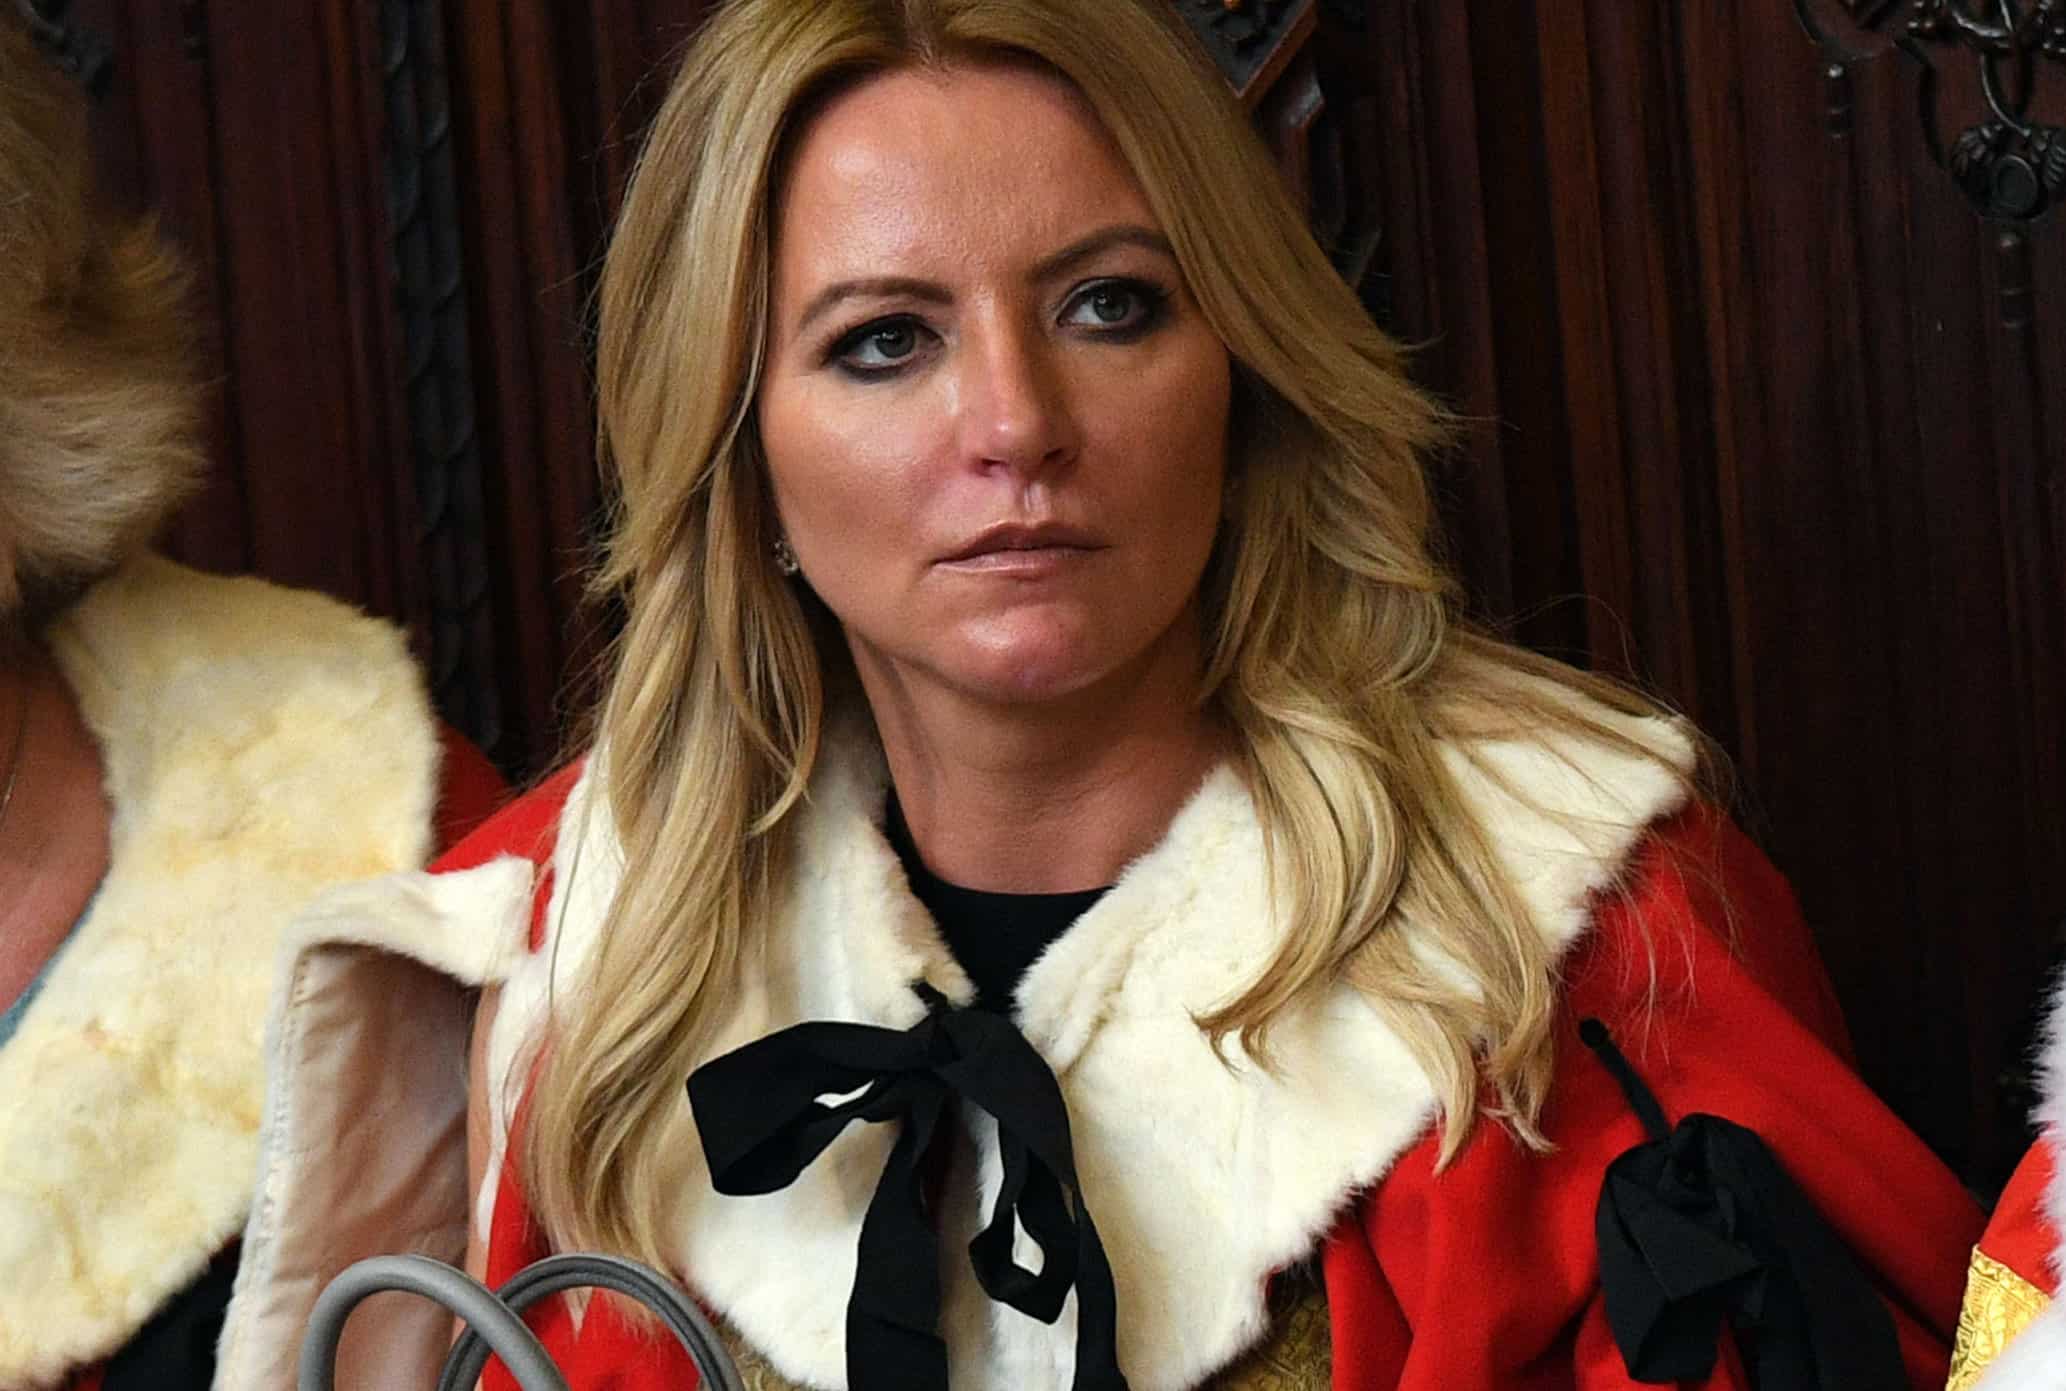 Baroness Mone takes leave of absence from Lords as Labour steps up pressure over PPE